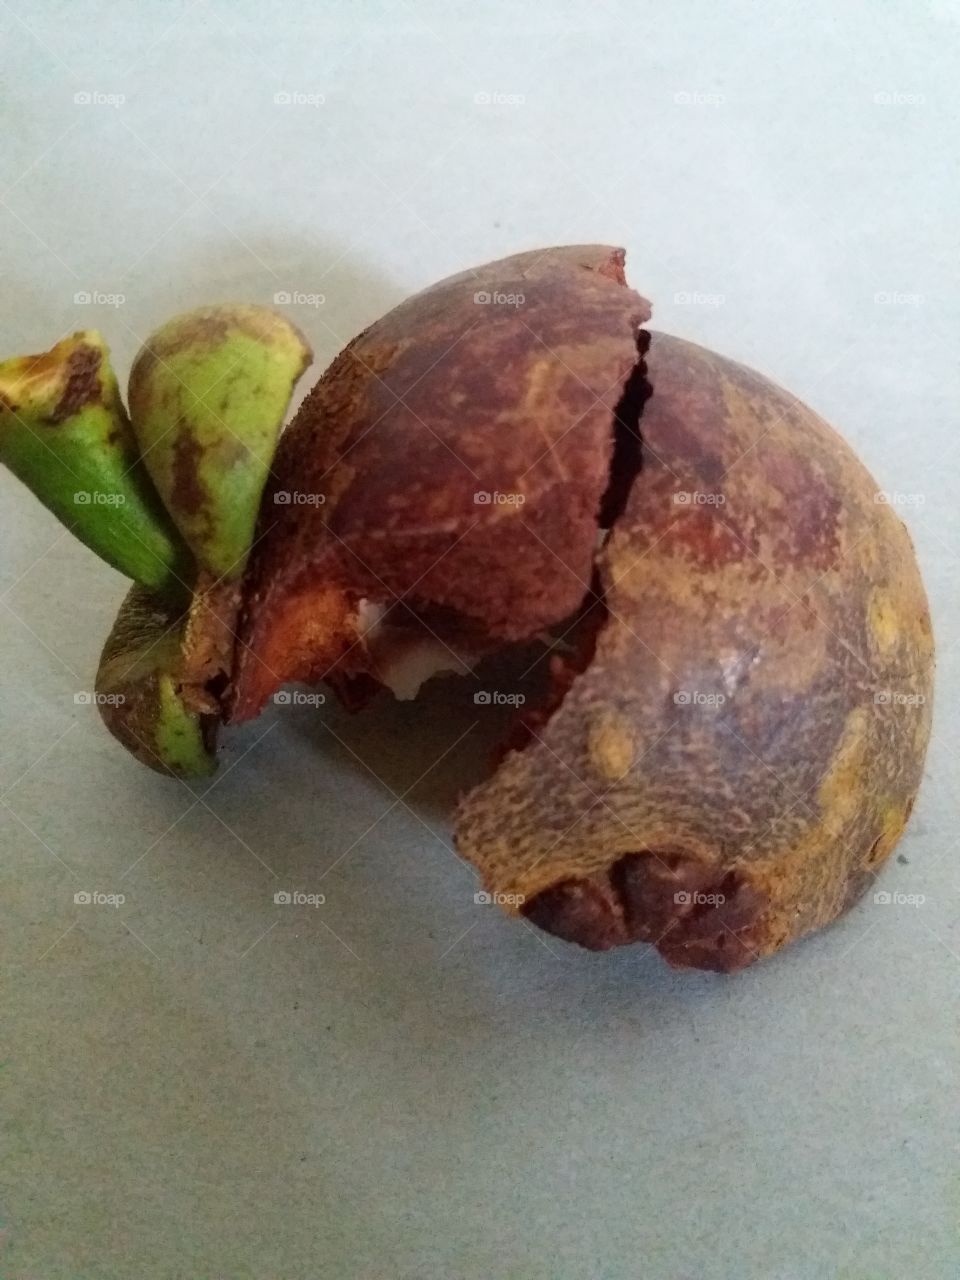 mangosteen peel

from the skin of this mangosteen can be used to be used as medicine, but if not should not make dirty environment